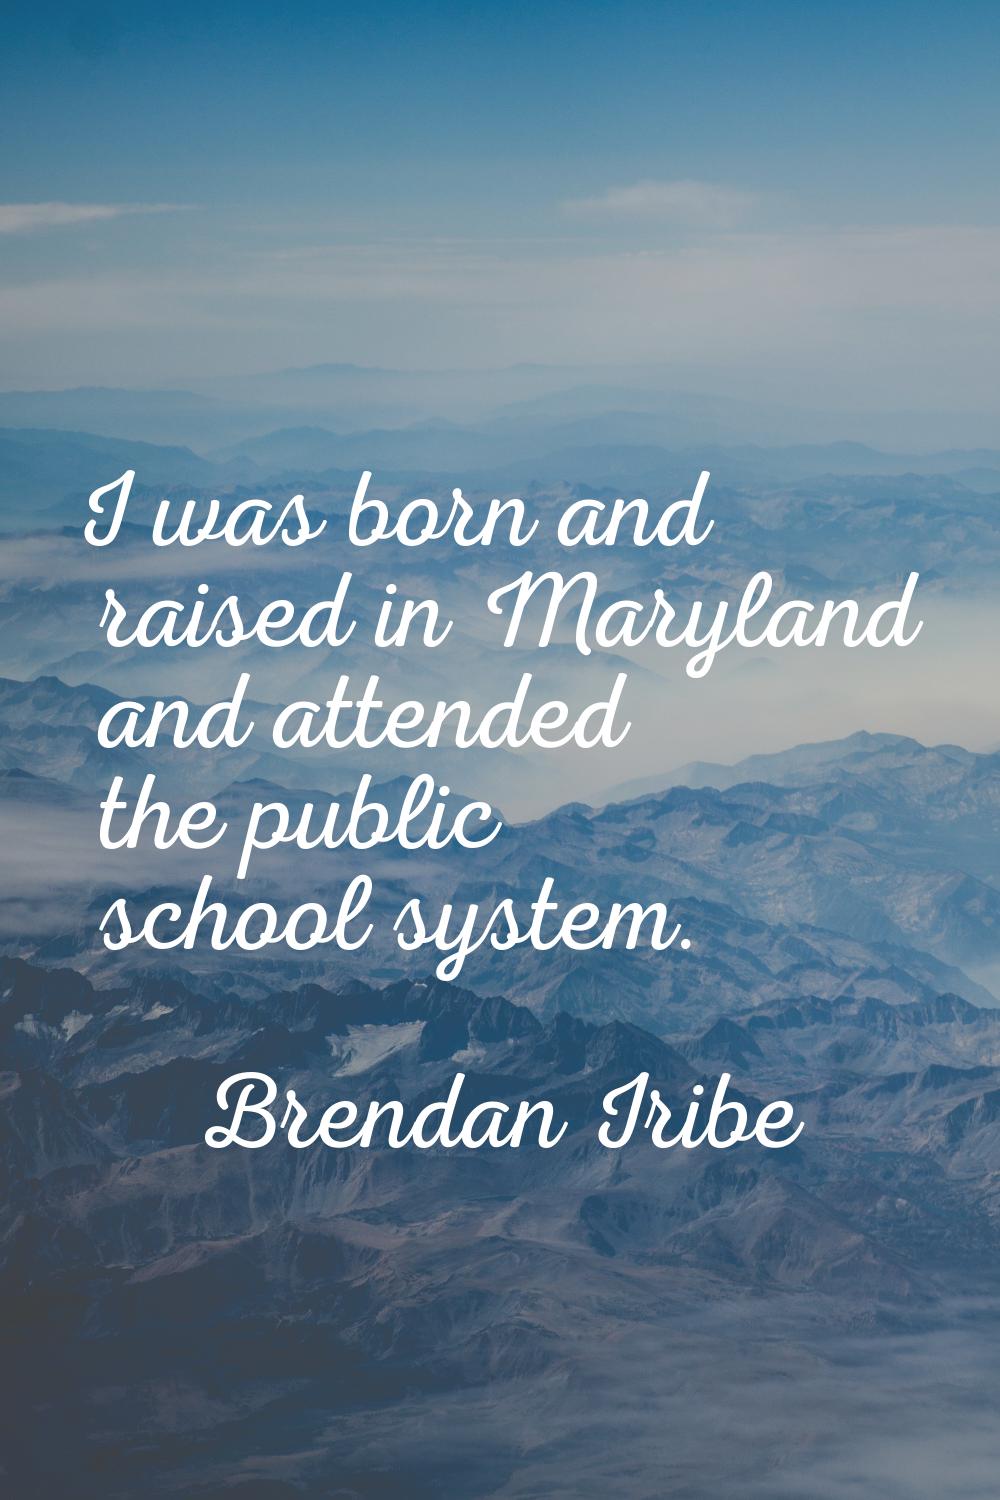 I was born and raised in Maryland and attended the public school system.